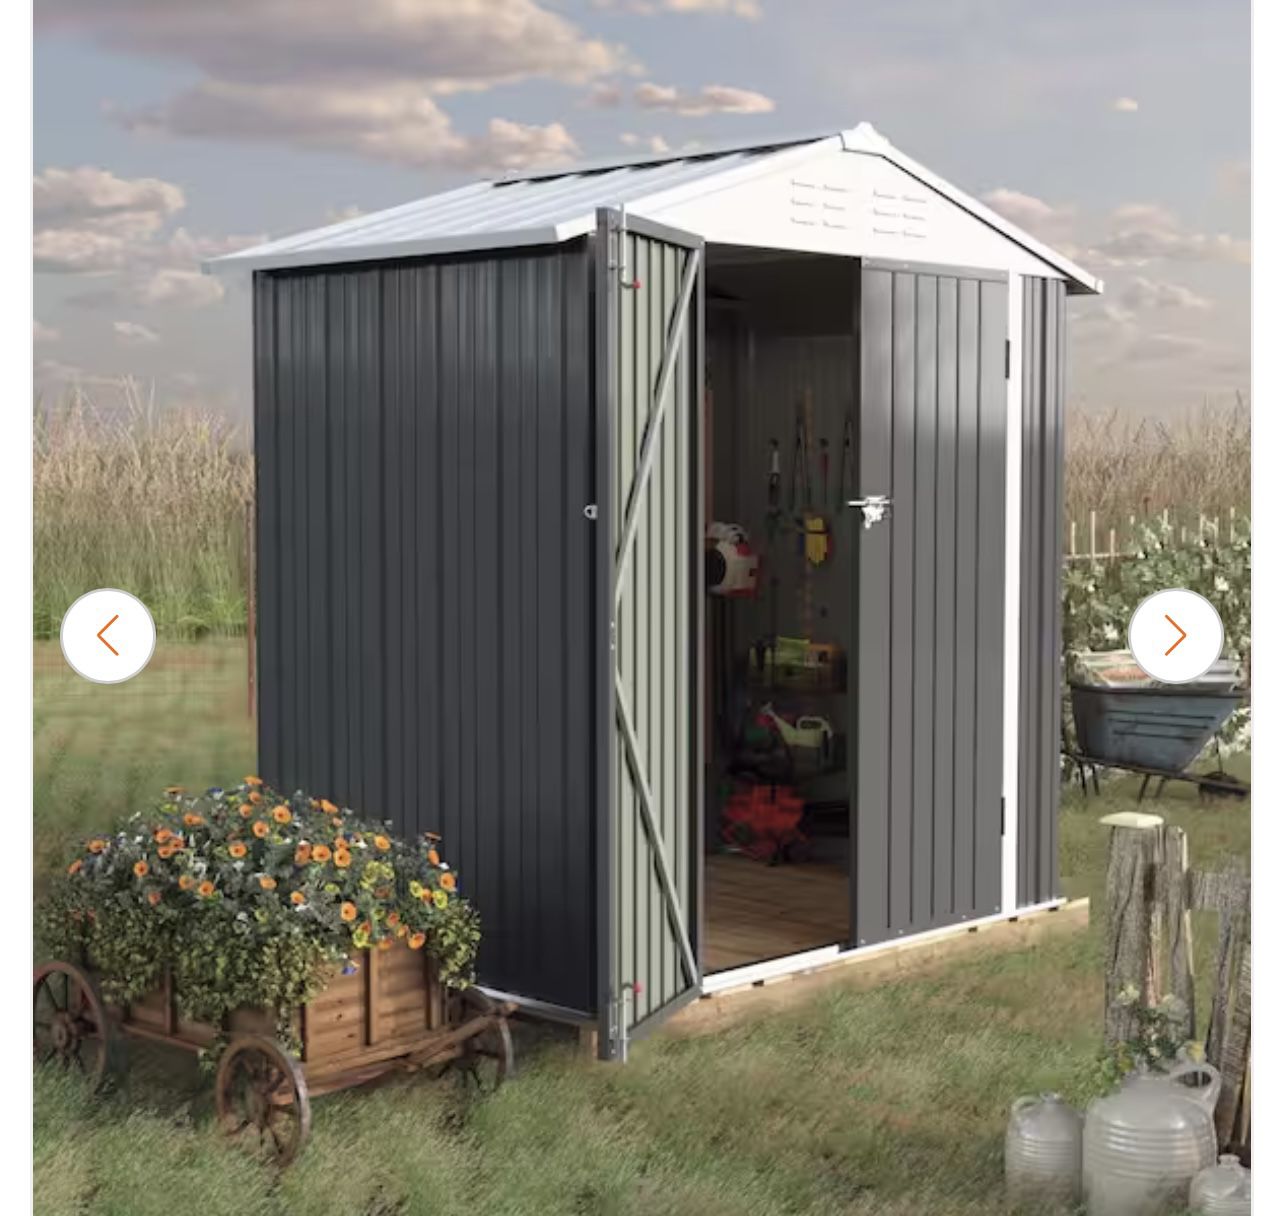 6 ft. W x 4 ft. D Outdoor Storage Metal Shed Utility Patio Shed for Garden and Backyard 